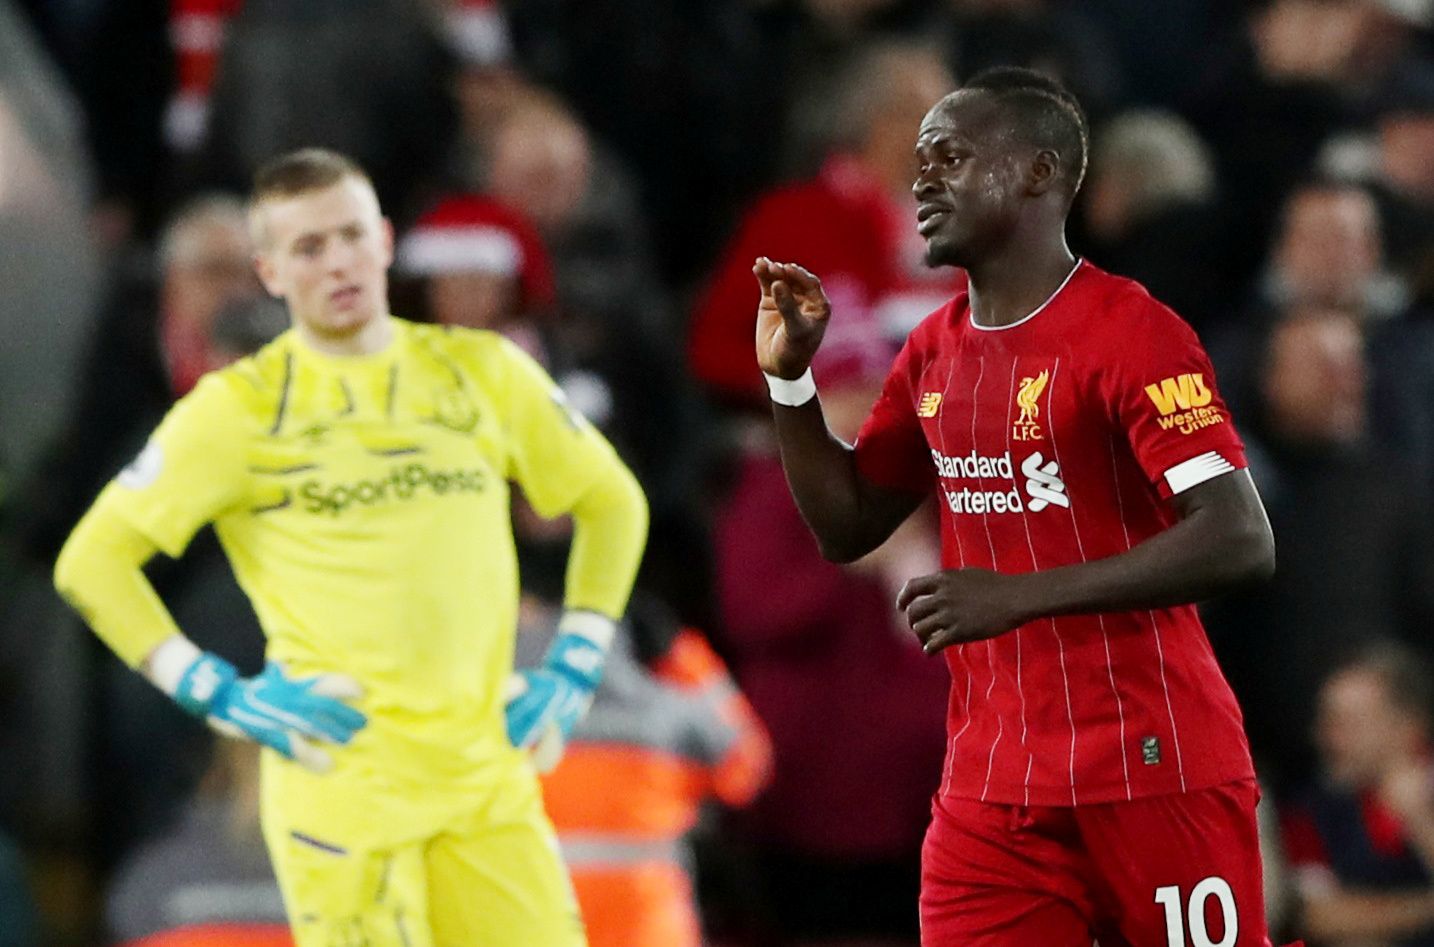 Soccer Football - Premier League - Liverpool v Everton - Anfield, Liverpool, Britain - December 4, 2019  Liverpool's Sadio Mane celebrates scoring their fourth goal as Everton's Jordan Pickford looks dejected   REUTERS/Scott Heppell  EDITORIAL USE ONLY. No use with unauthorized audio, video, data, fixture lists, club/league logos or 